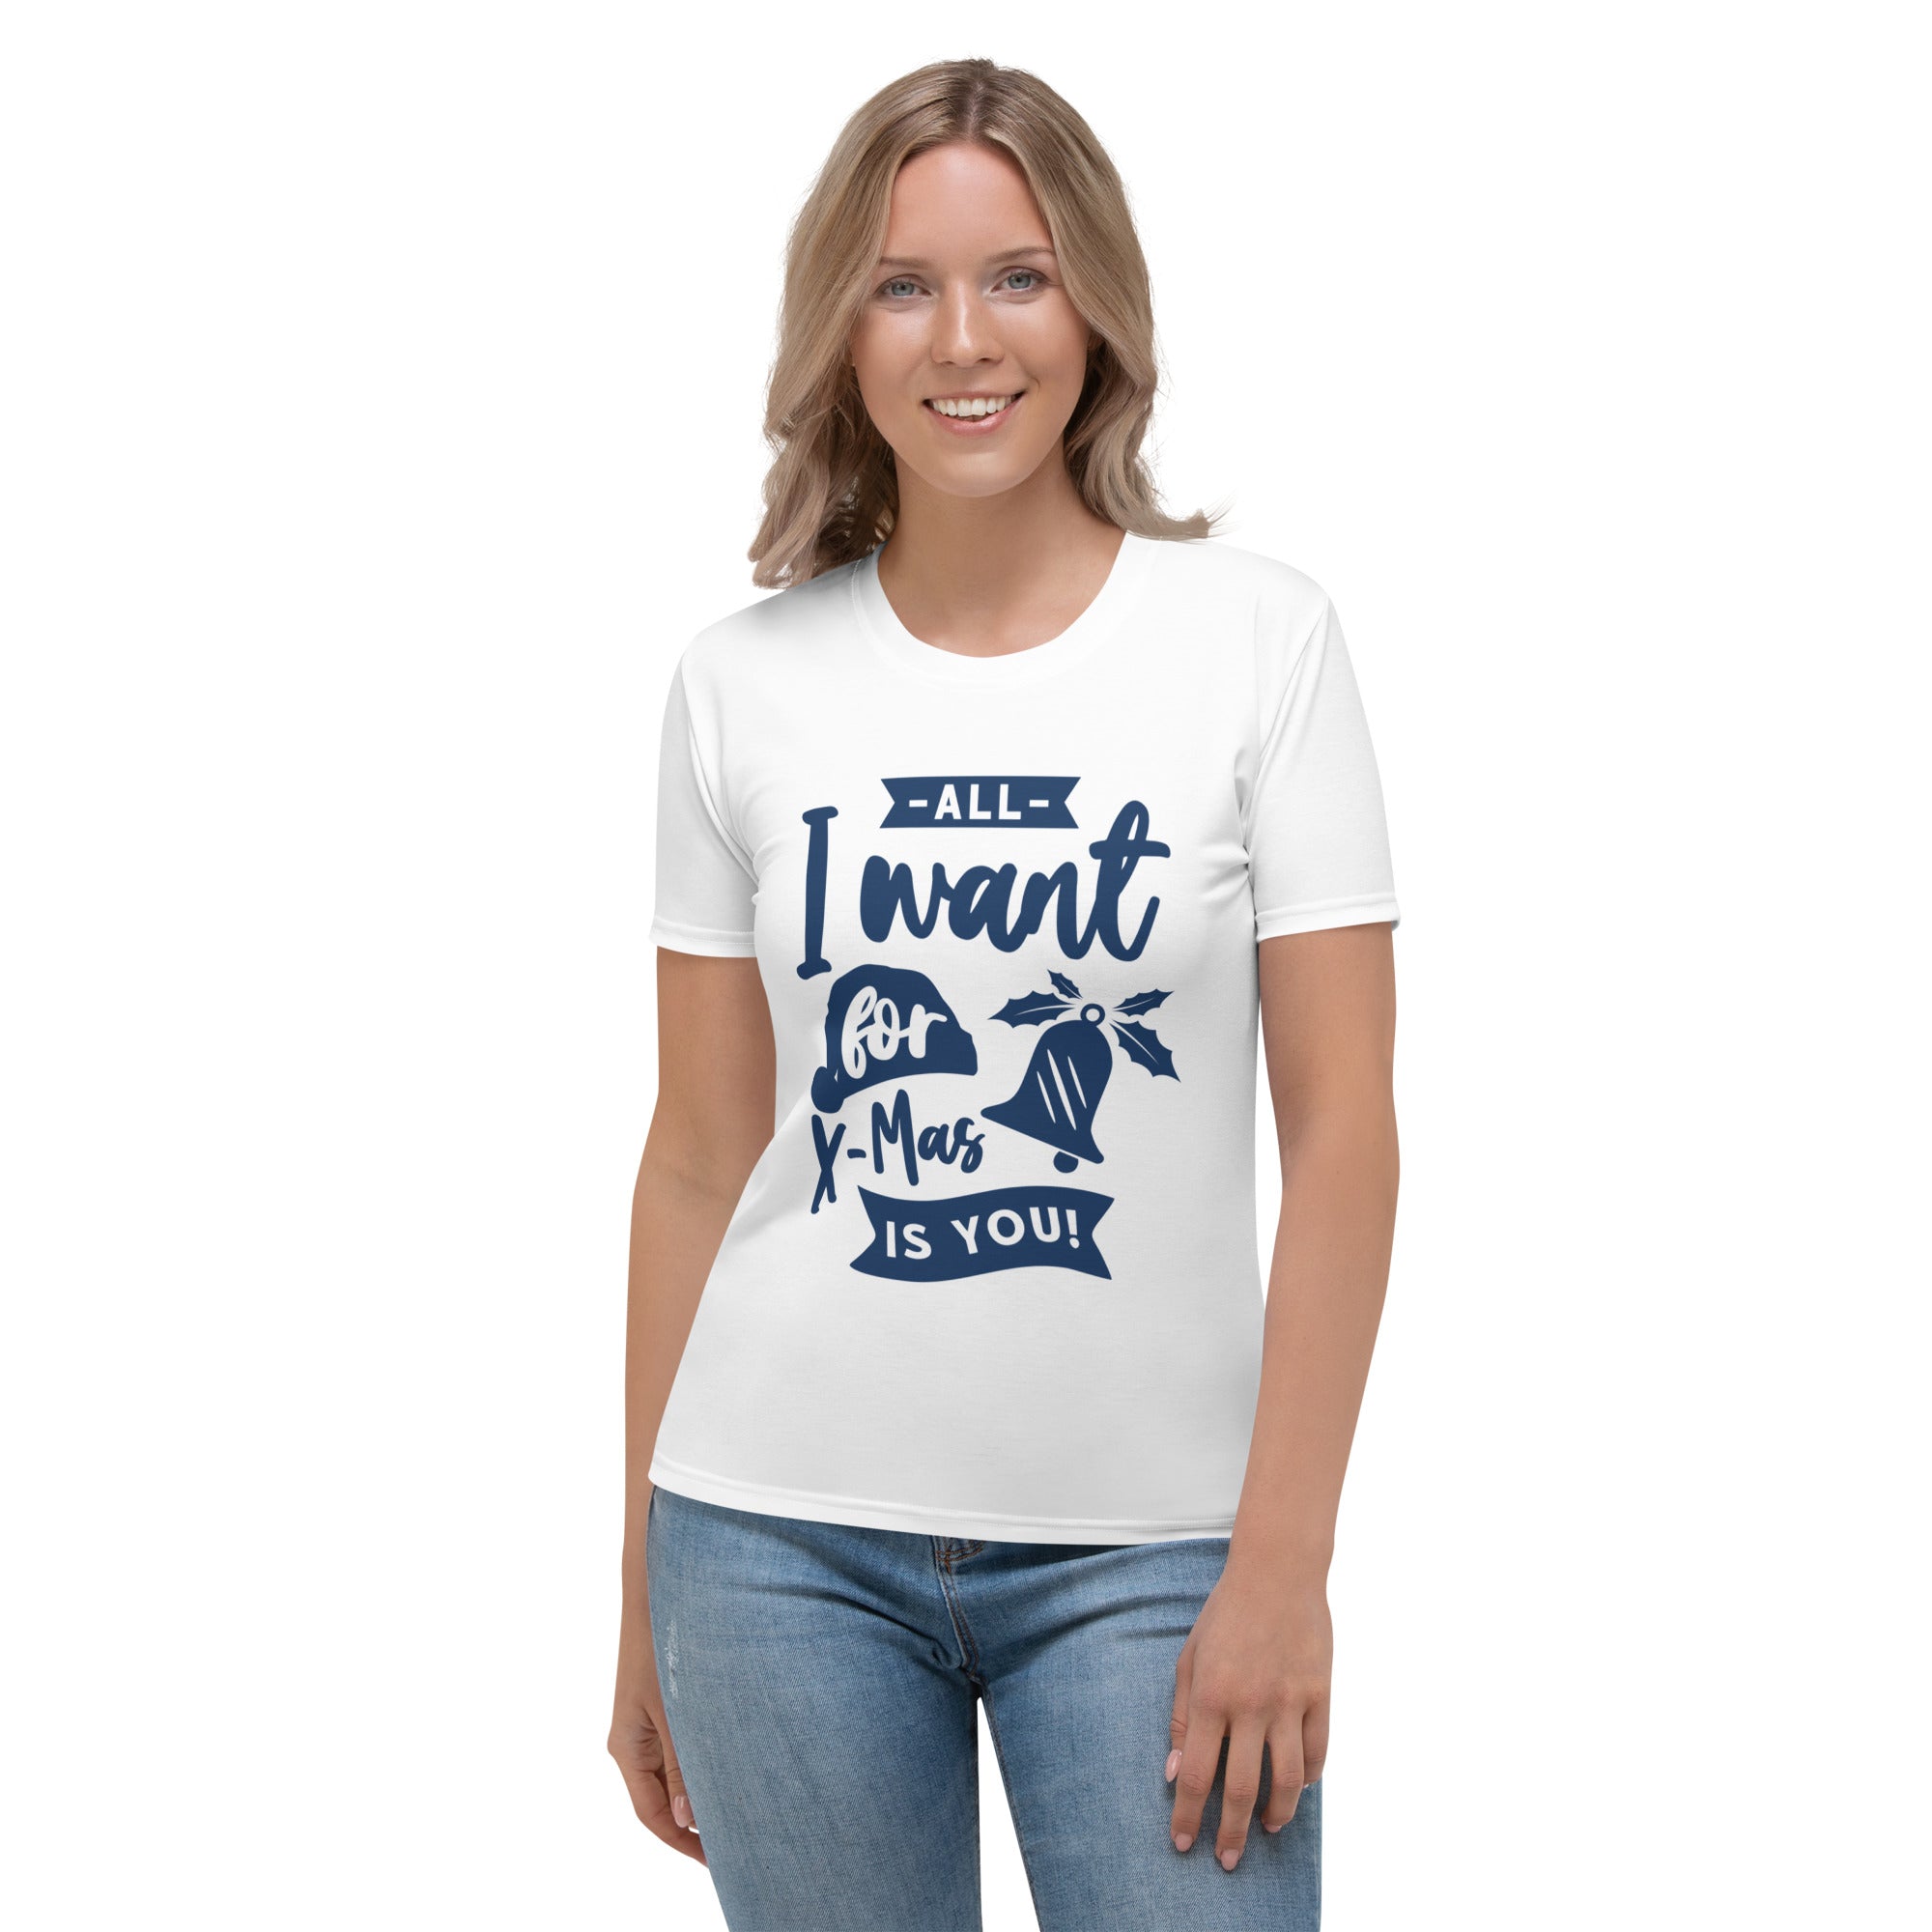 All I Want for Christmas is True Love - Women's T-shirt